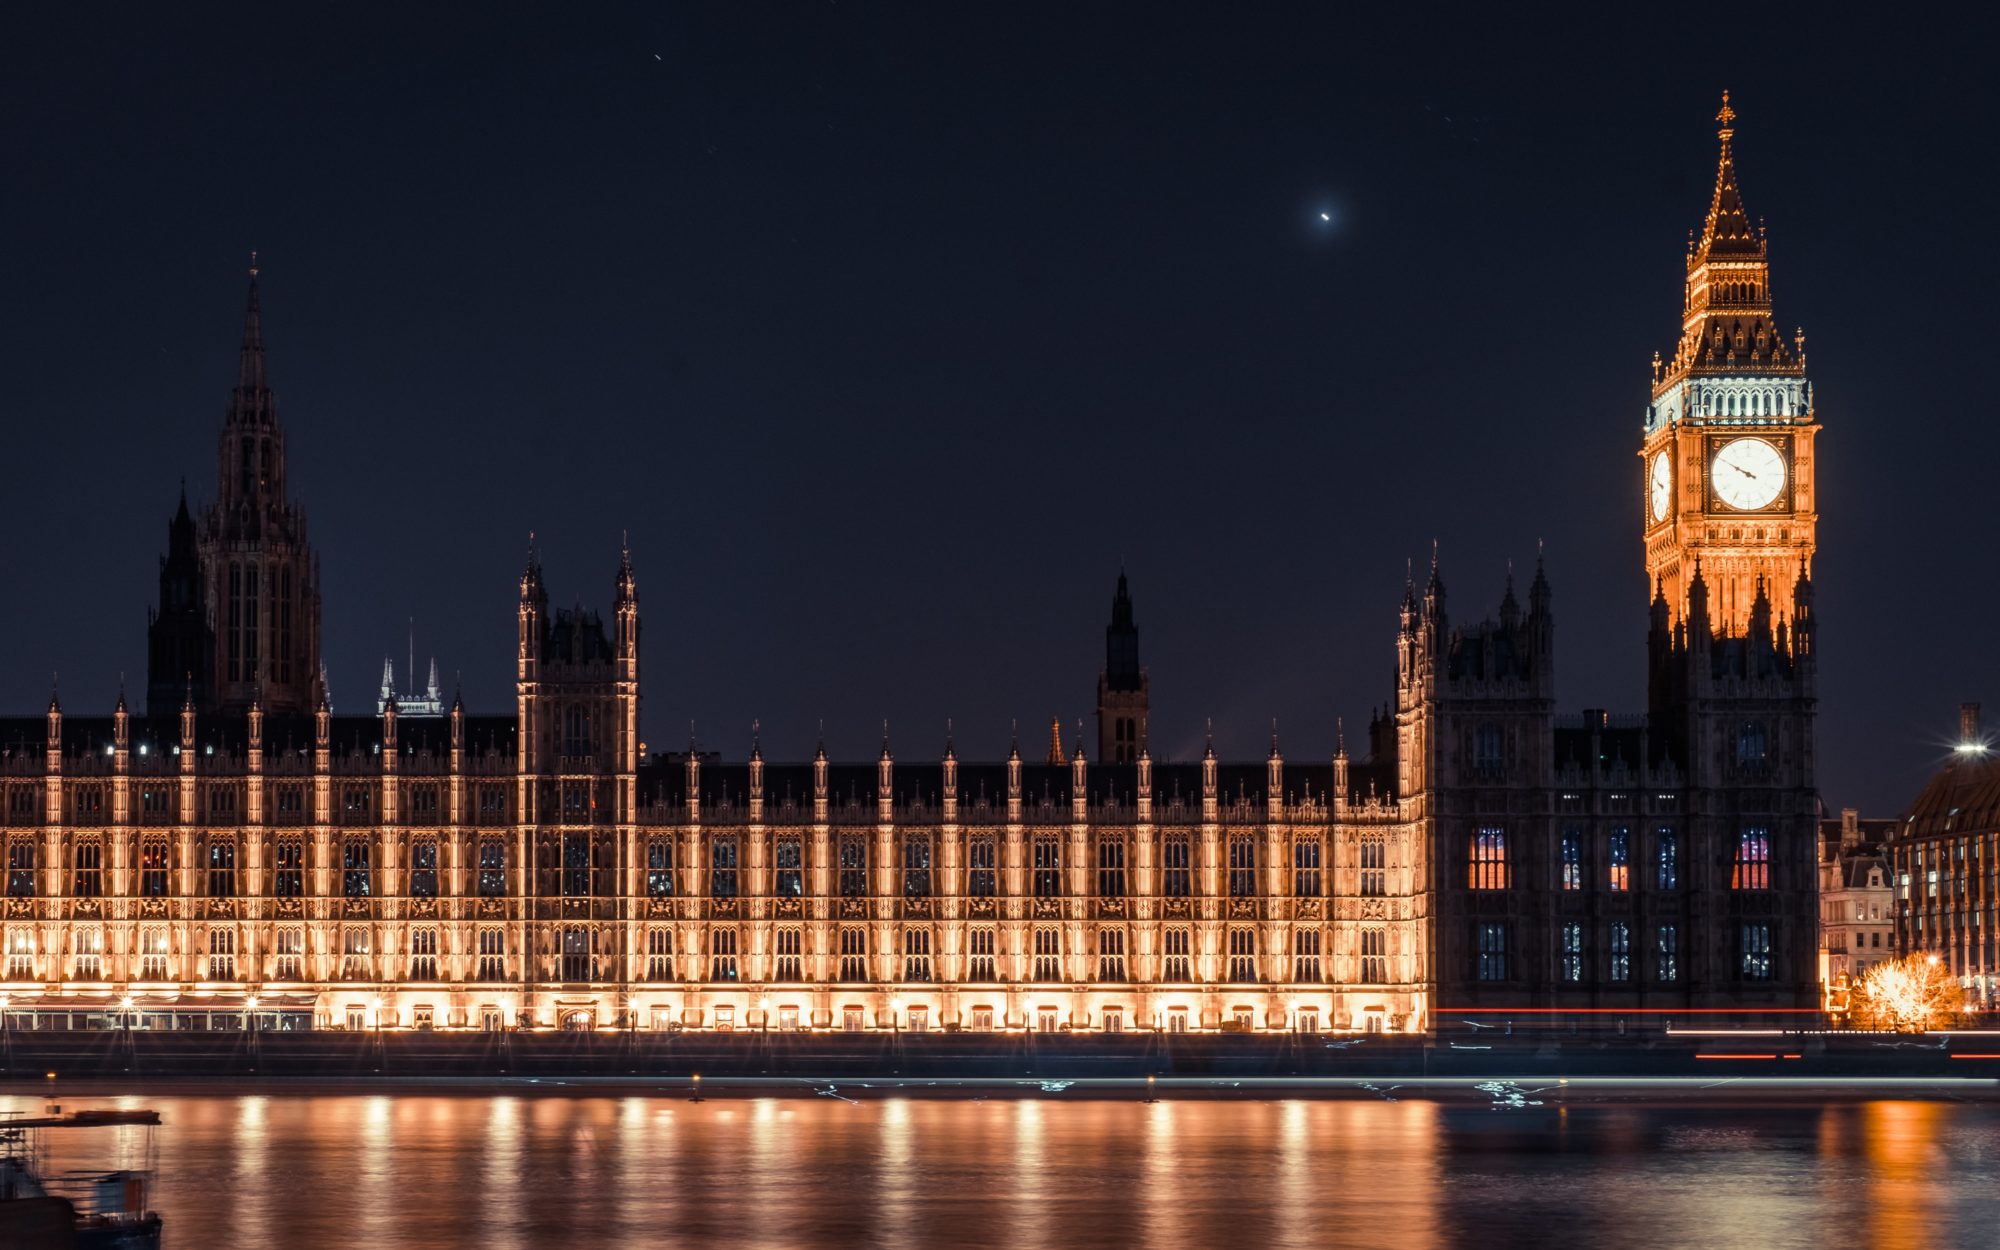 Houses of Parliament lit up at night - Photo by Samuel Zeller on Unsplash